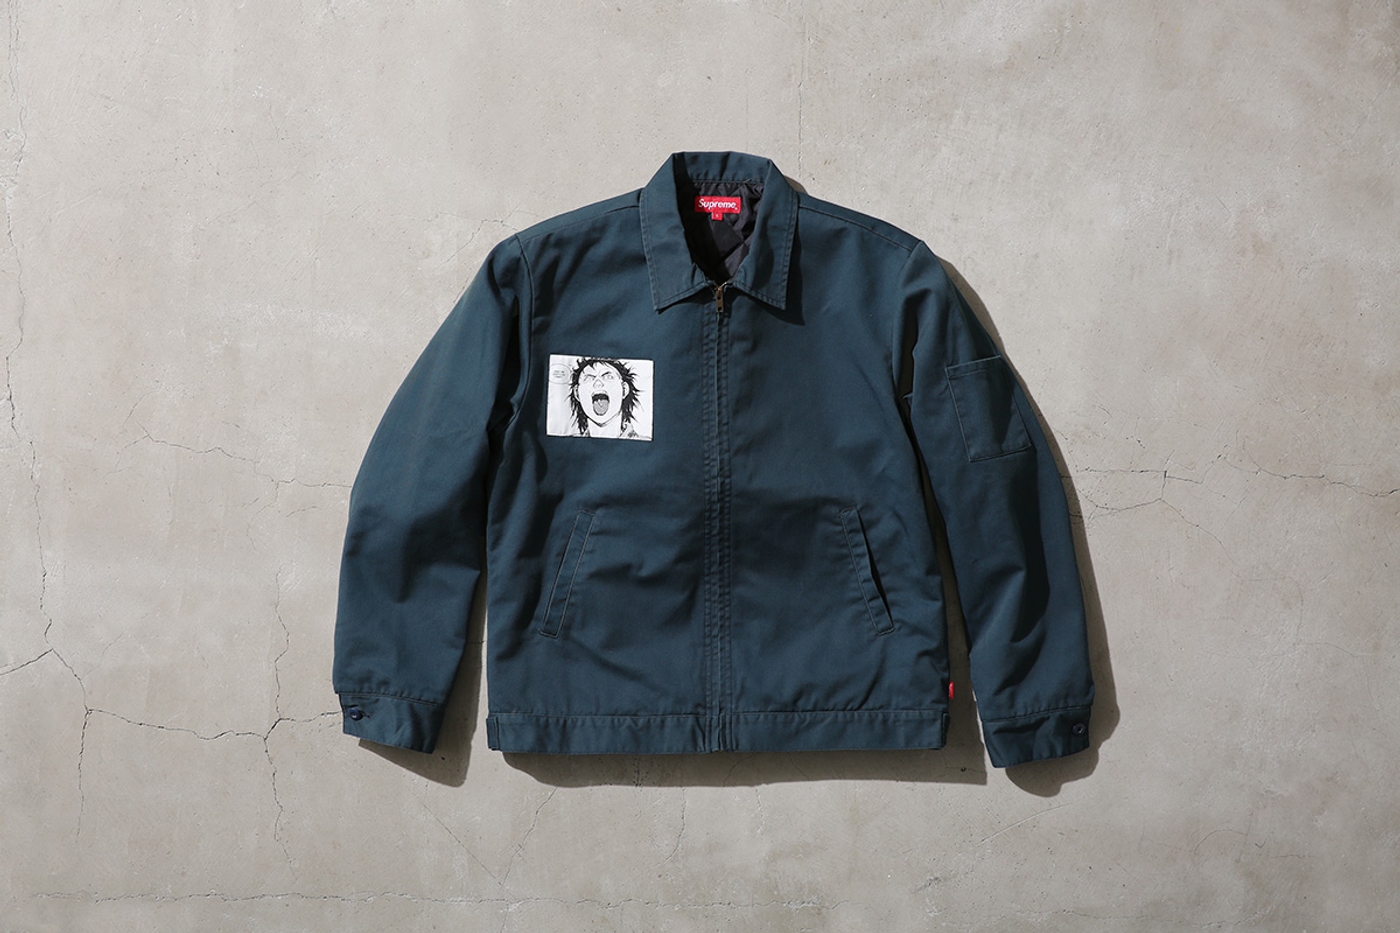 Work Jacket with woven patches. (13/40)